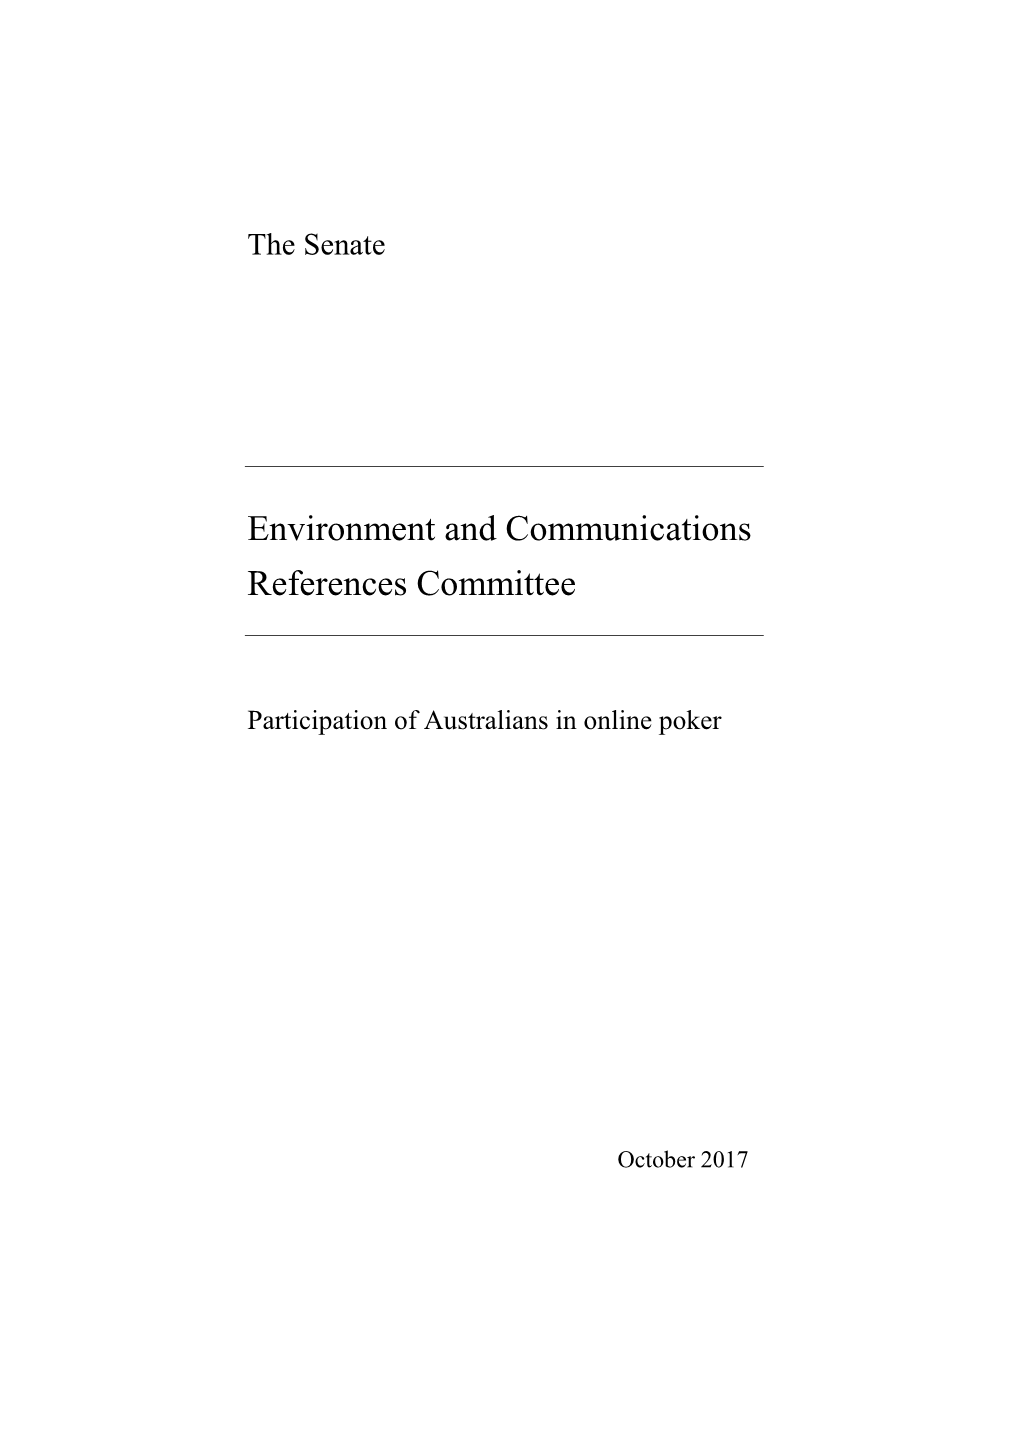 Environment and Communications References Committee